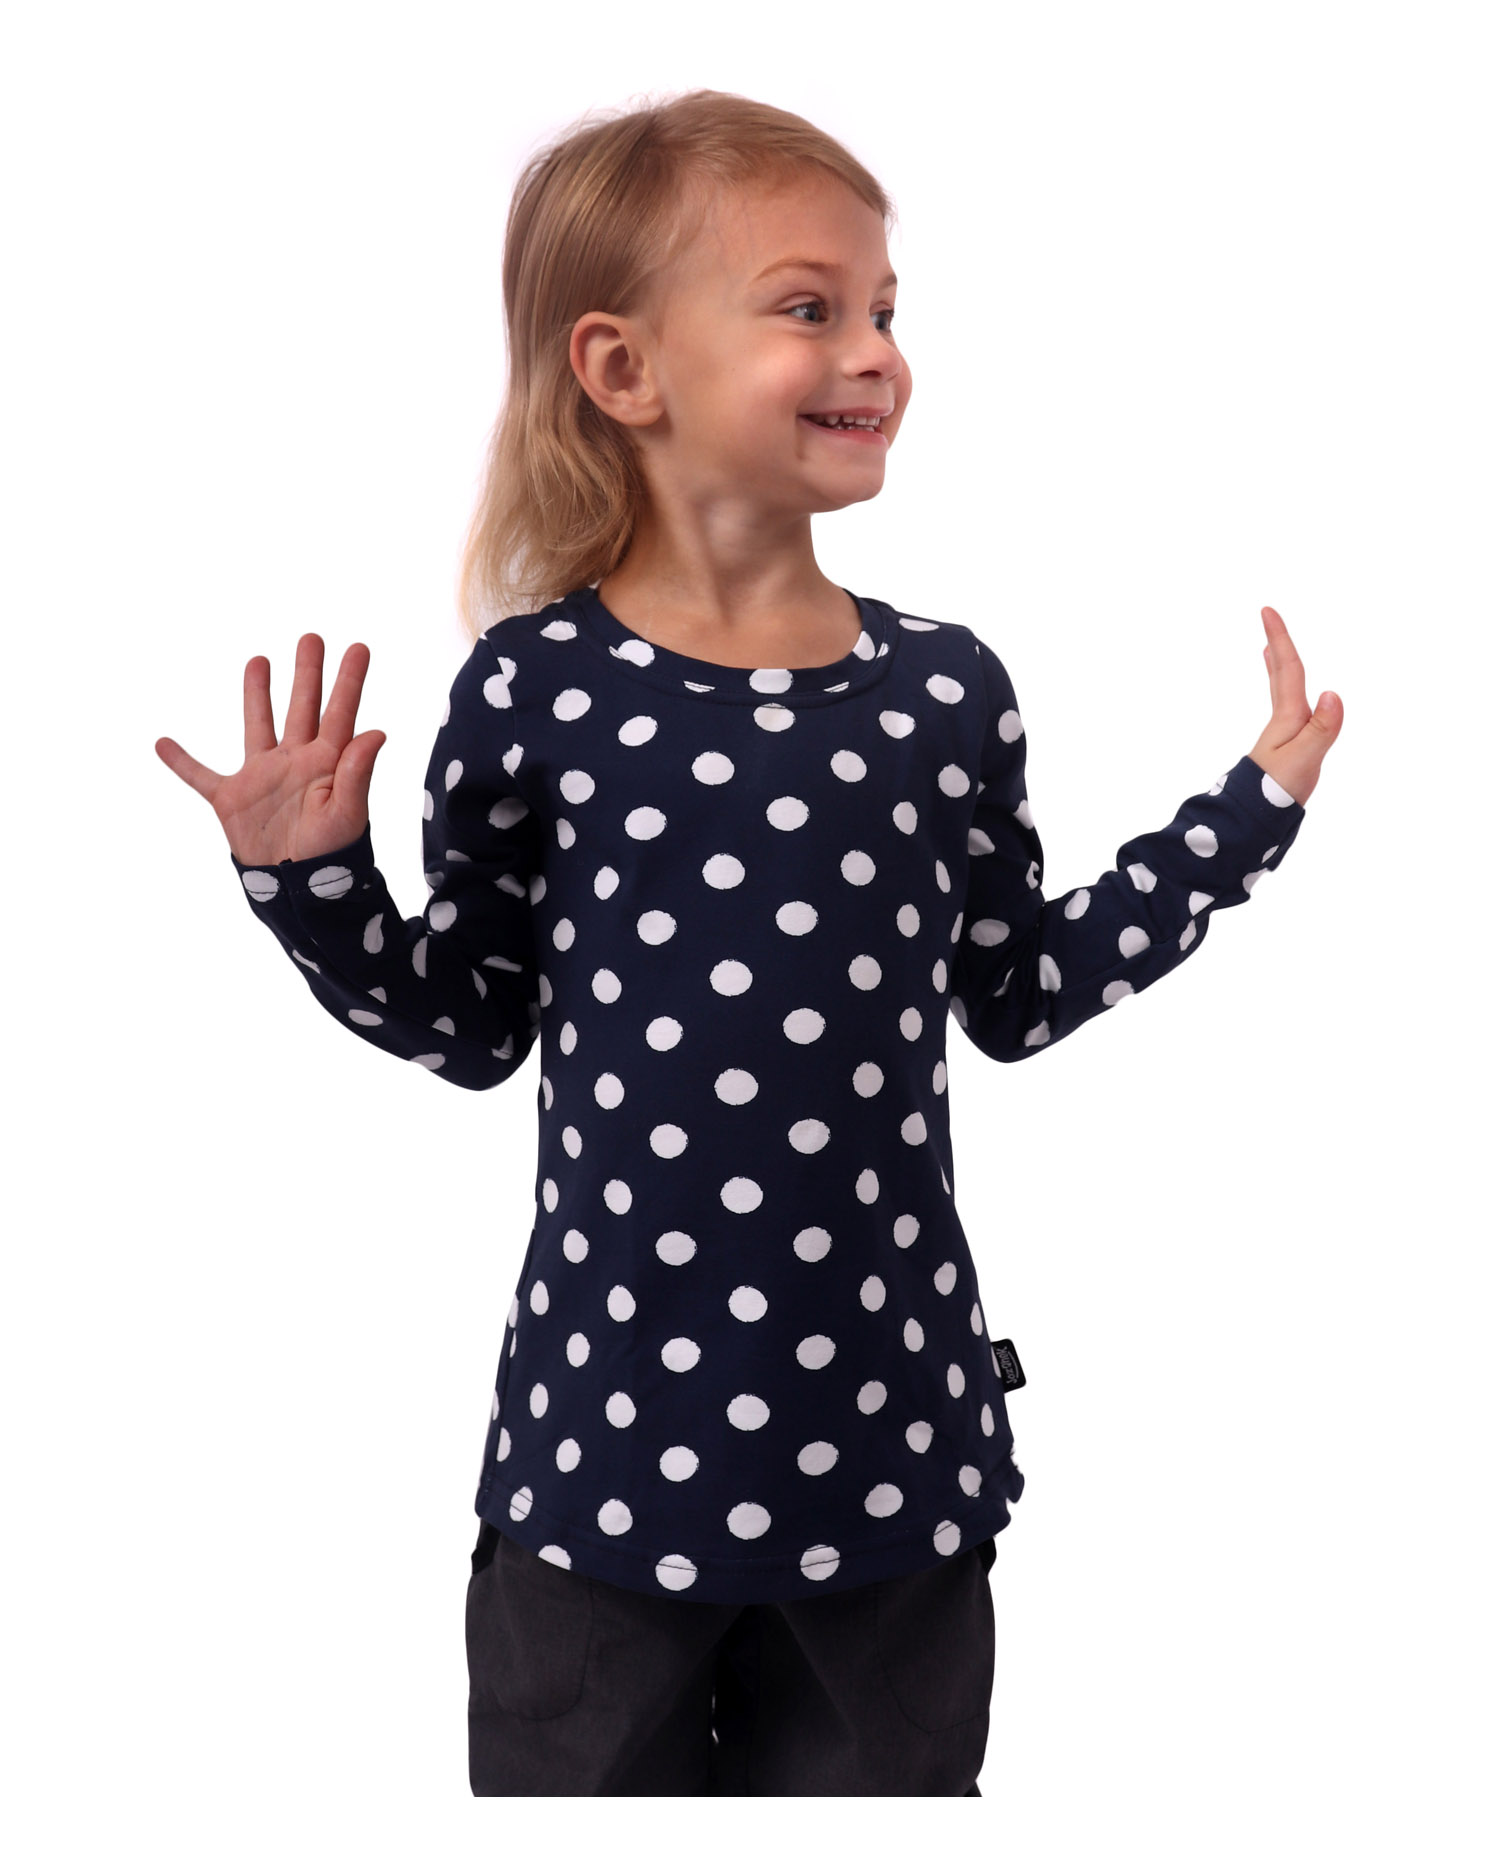 Girl's T-shirt, long sleeve, blue with polka dots